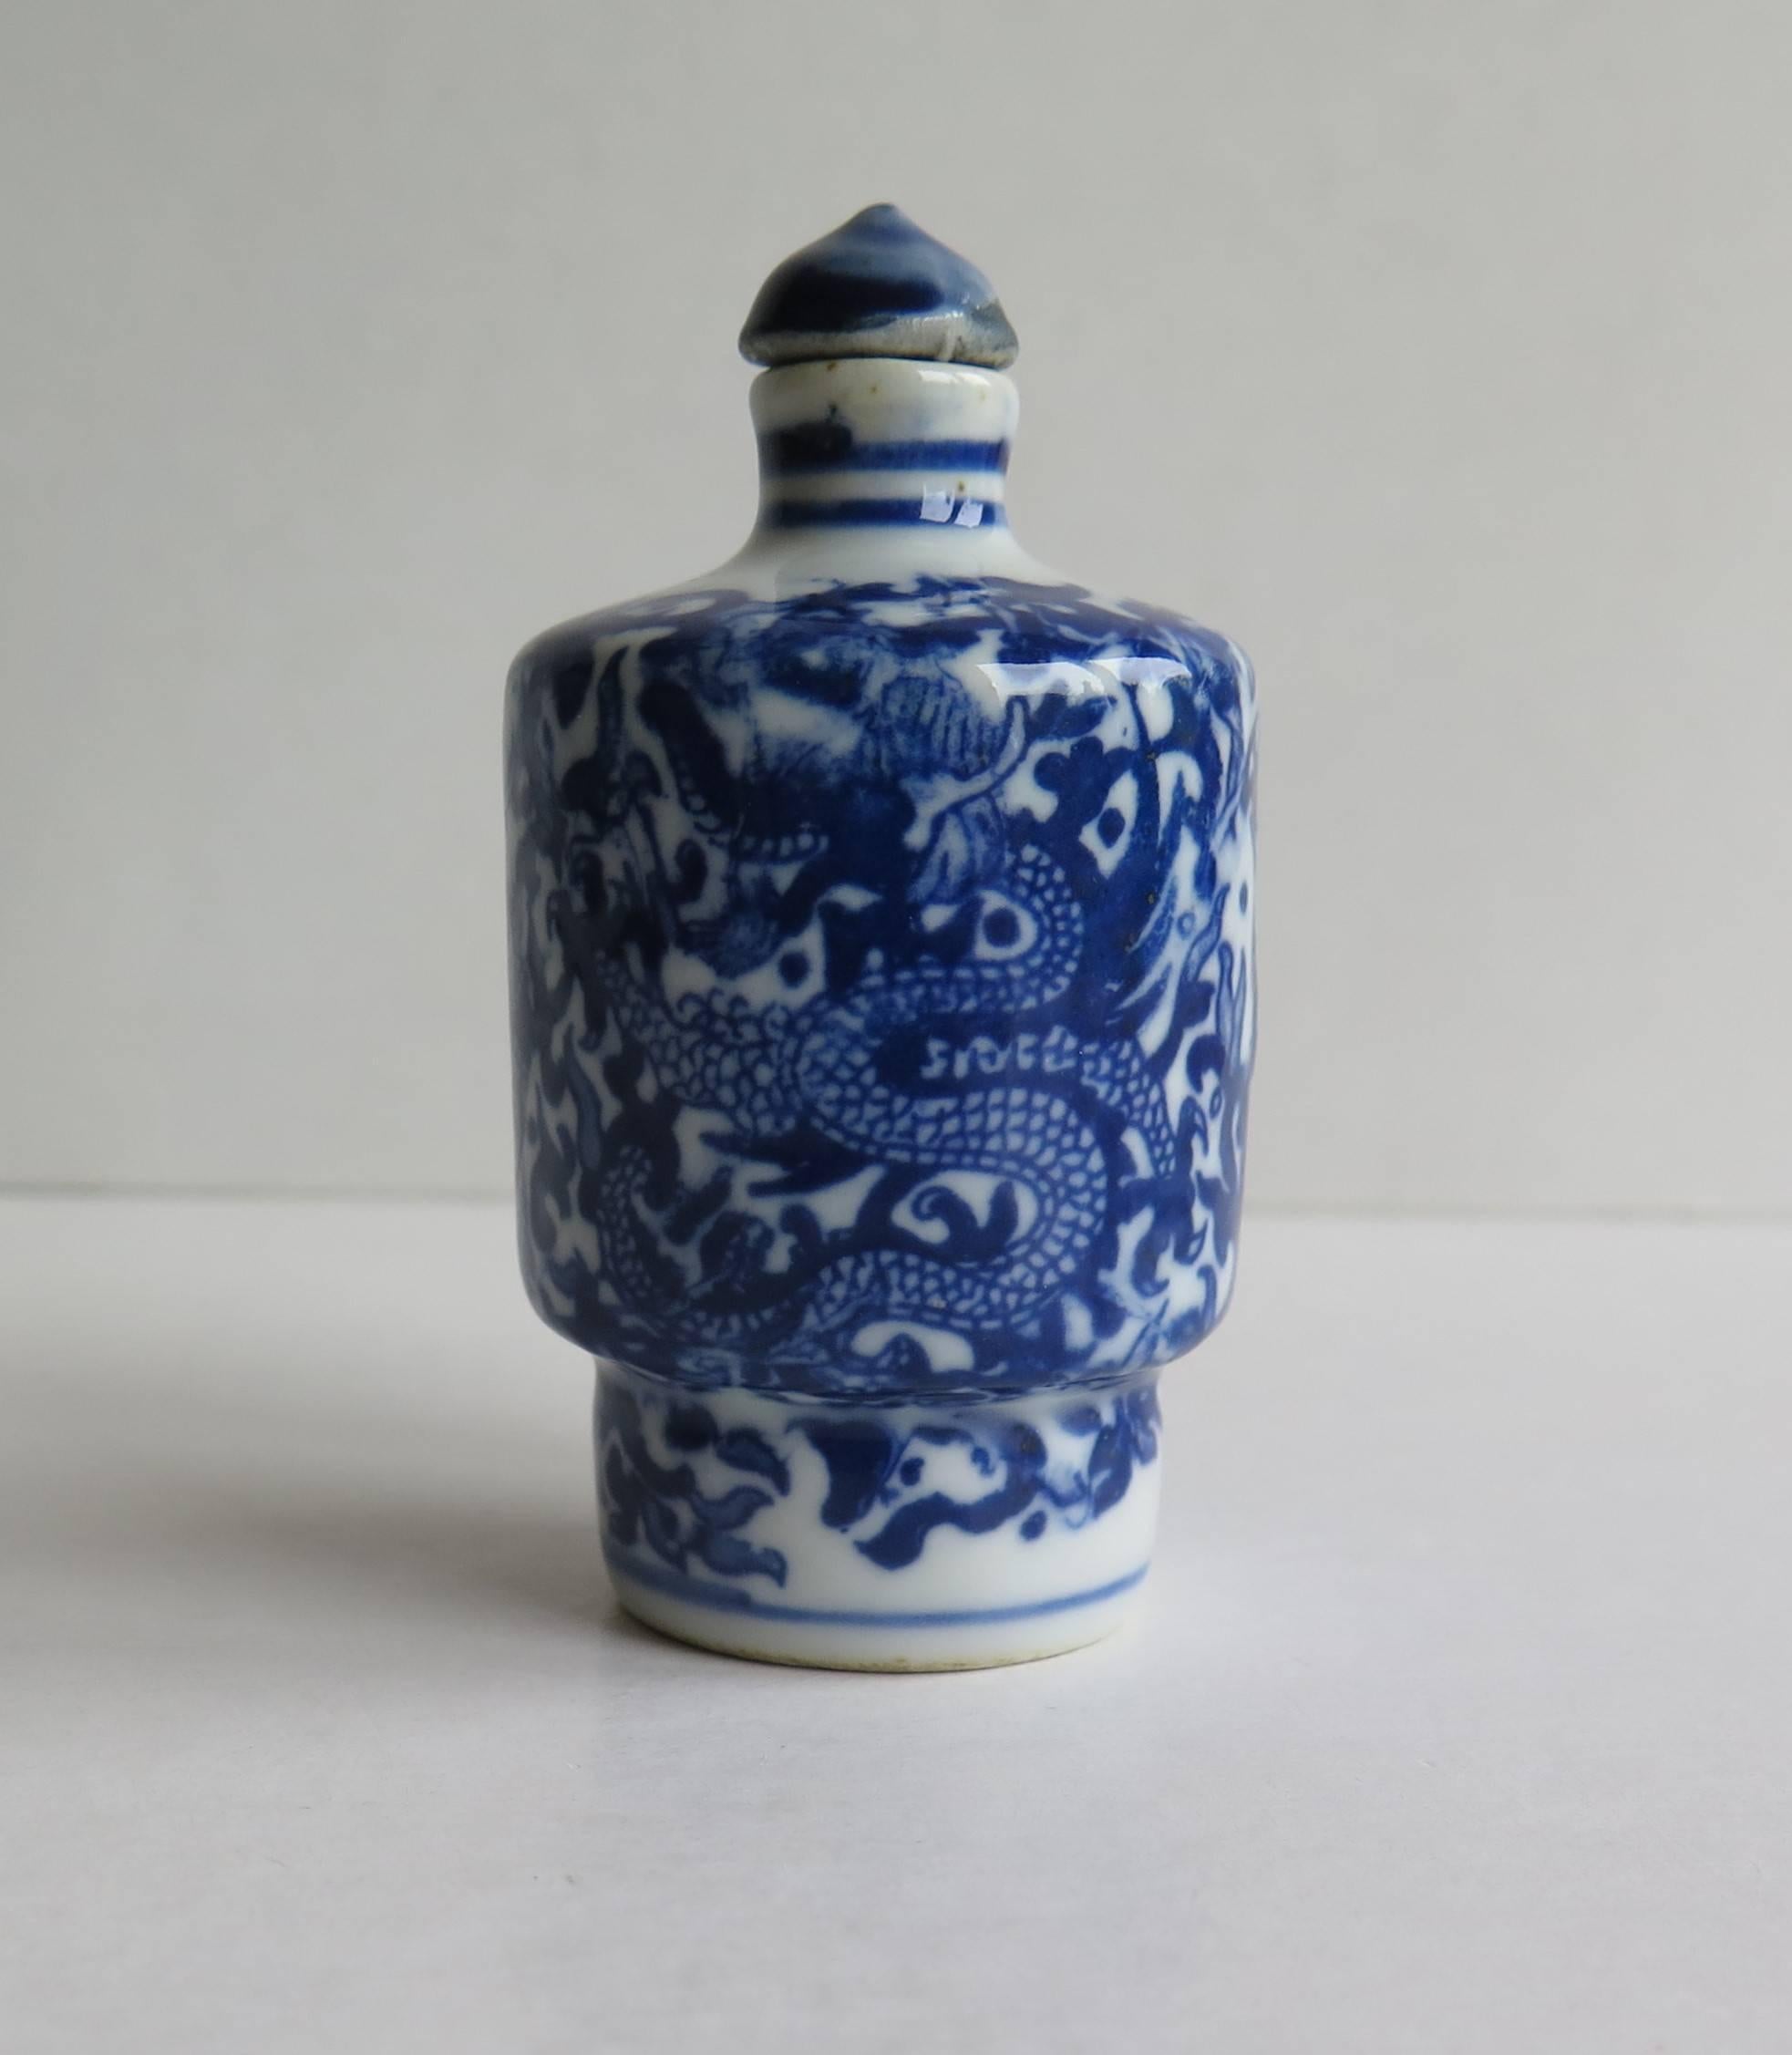 Qing Chinese Porcelain Snuff Bottle Blue and White Hand-Painted Dragons, circa 1925